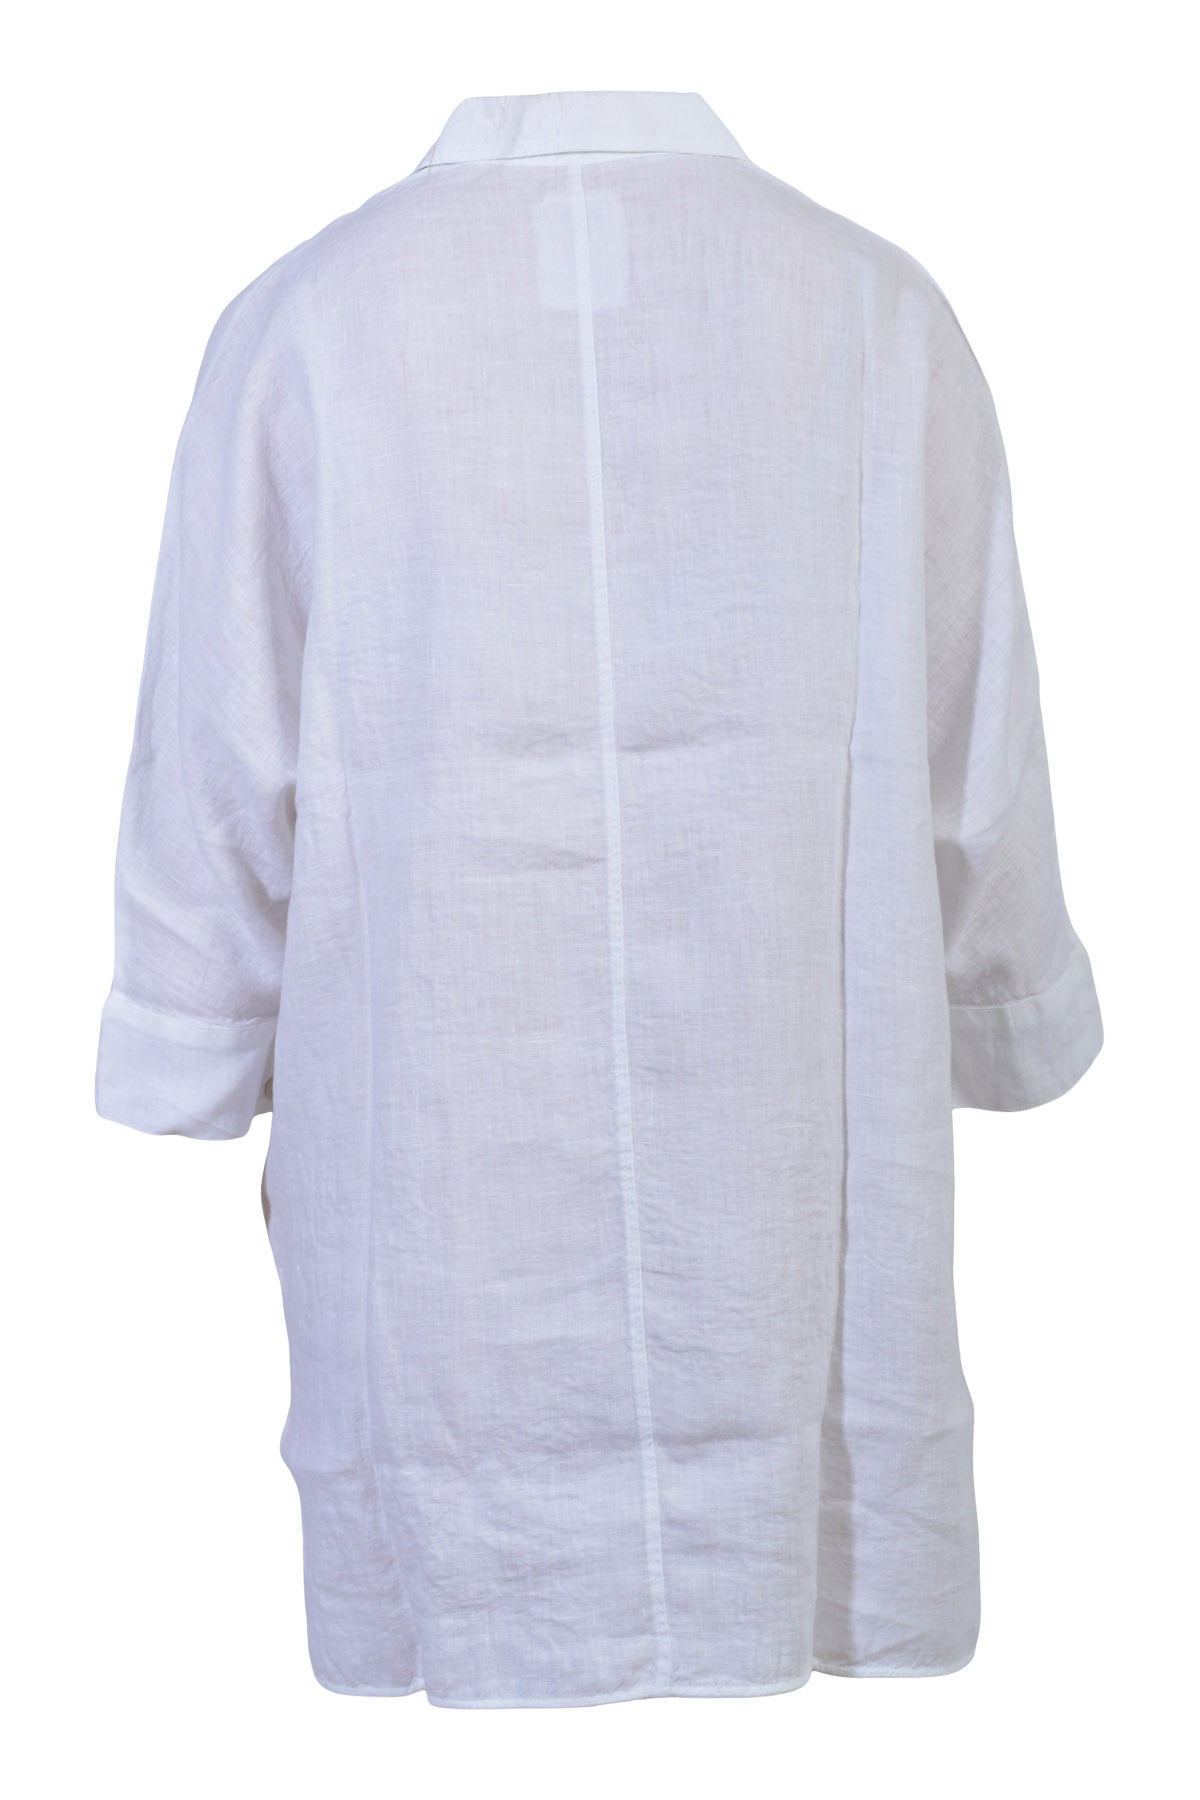 Own by basics blouse wide, White